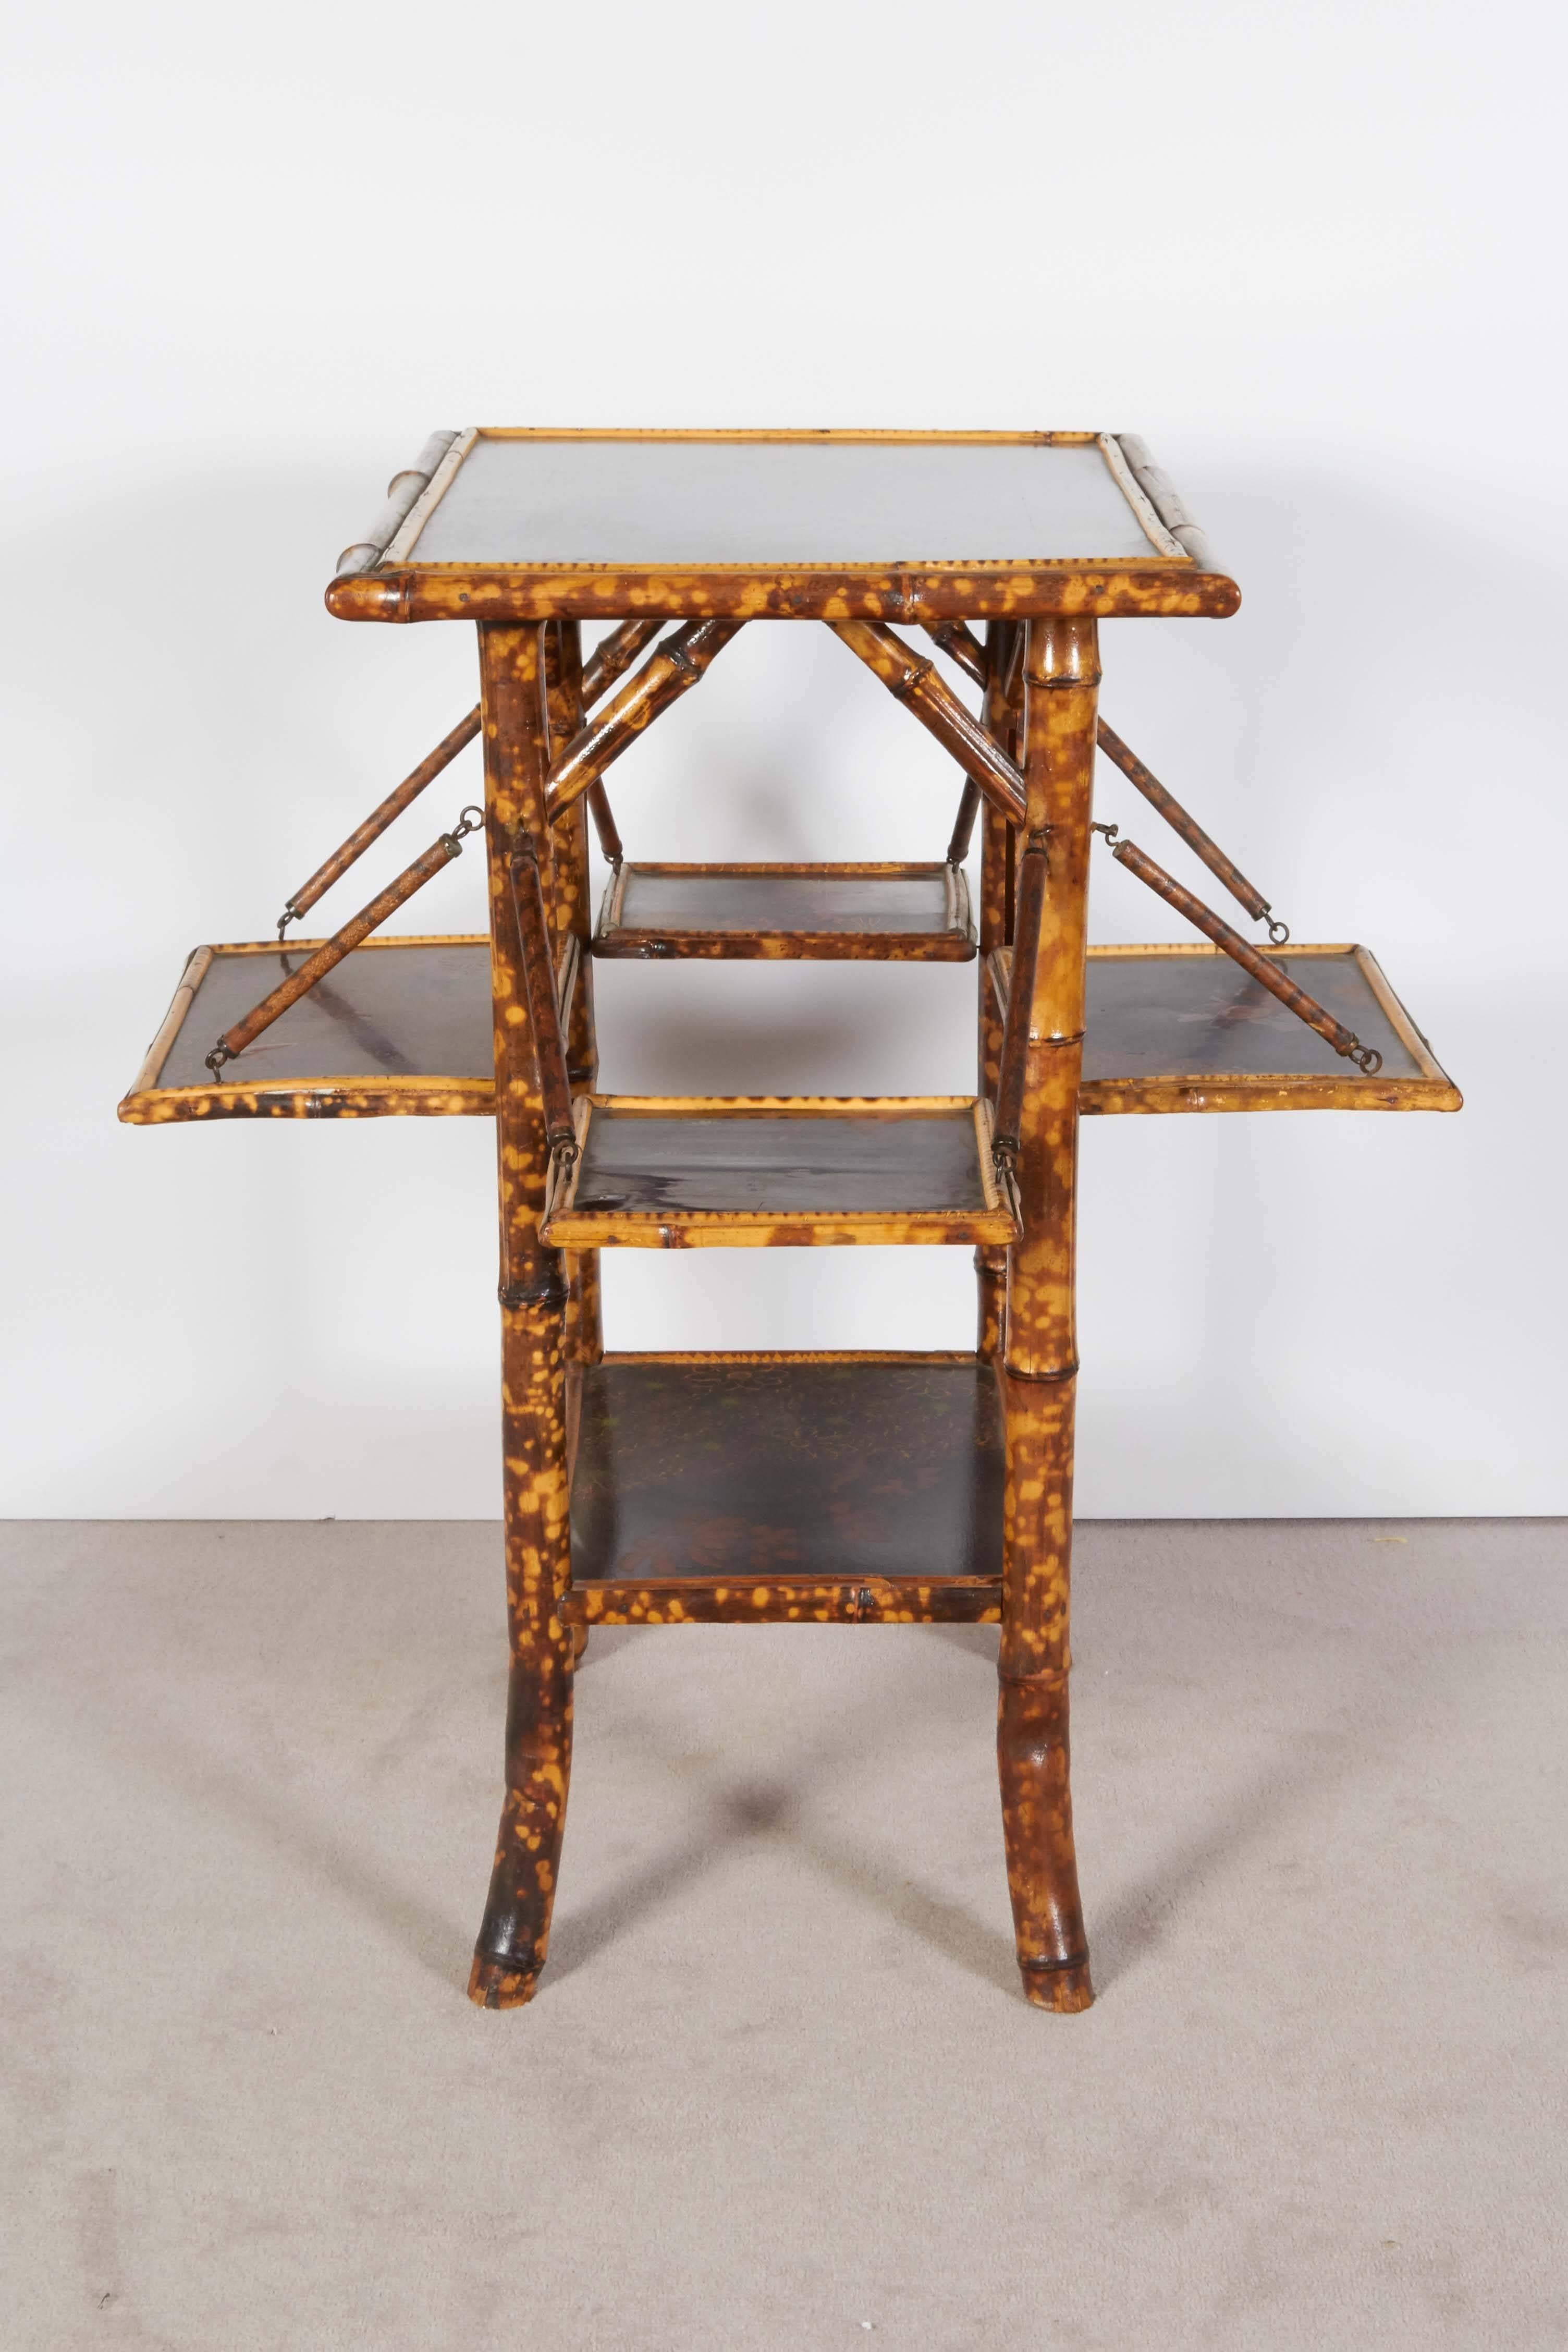 Lacquered Victorian Anglo-Japanese Tortoiseshell Bamboo Table